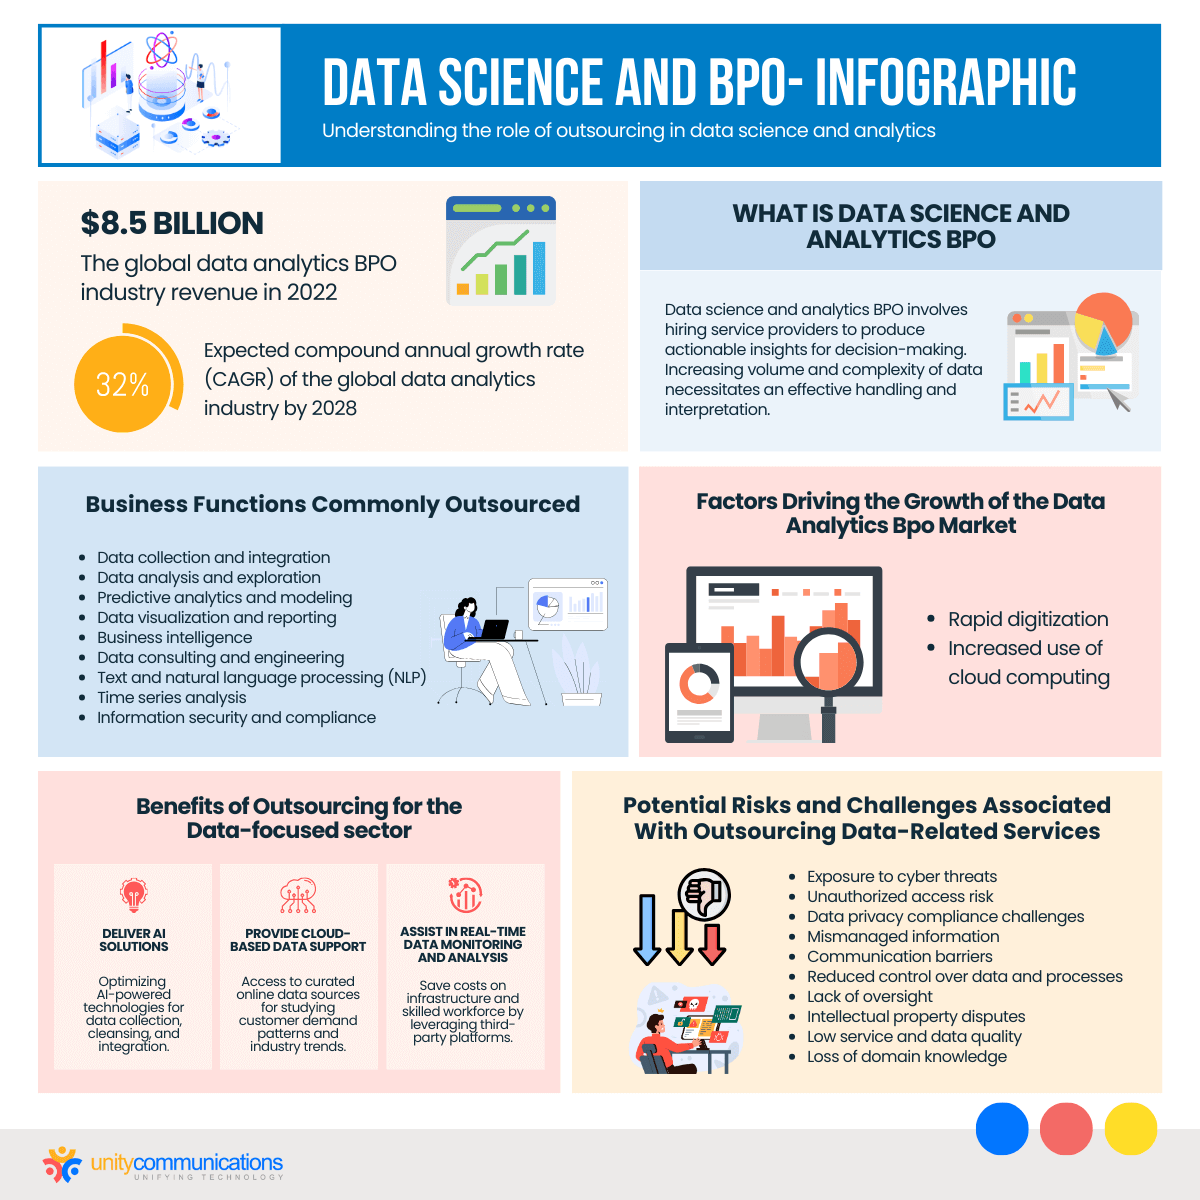 Data Science and BPO - Infographic